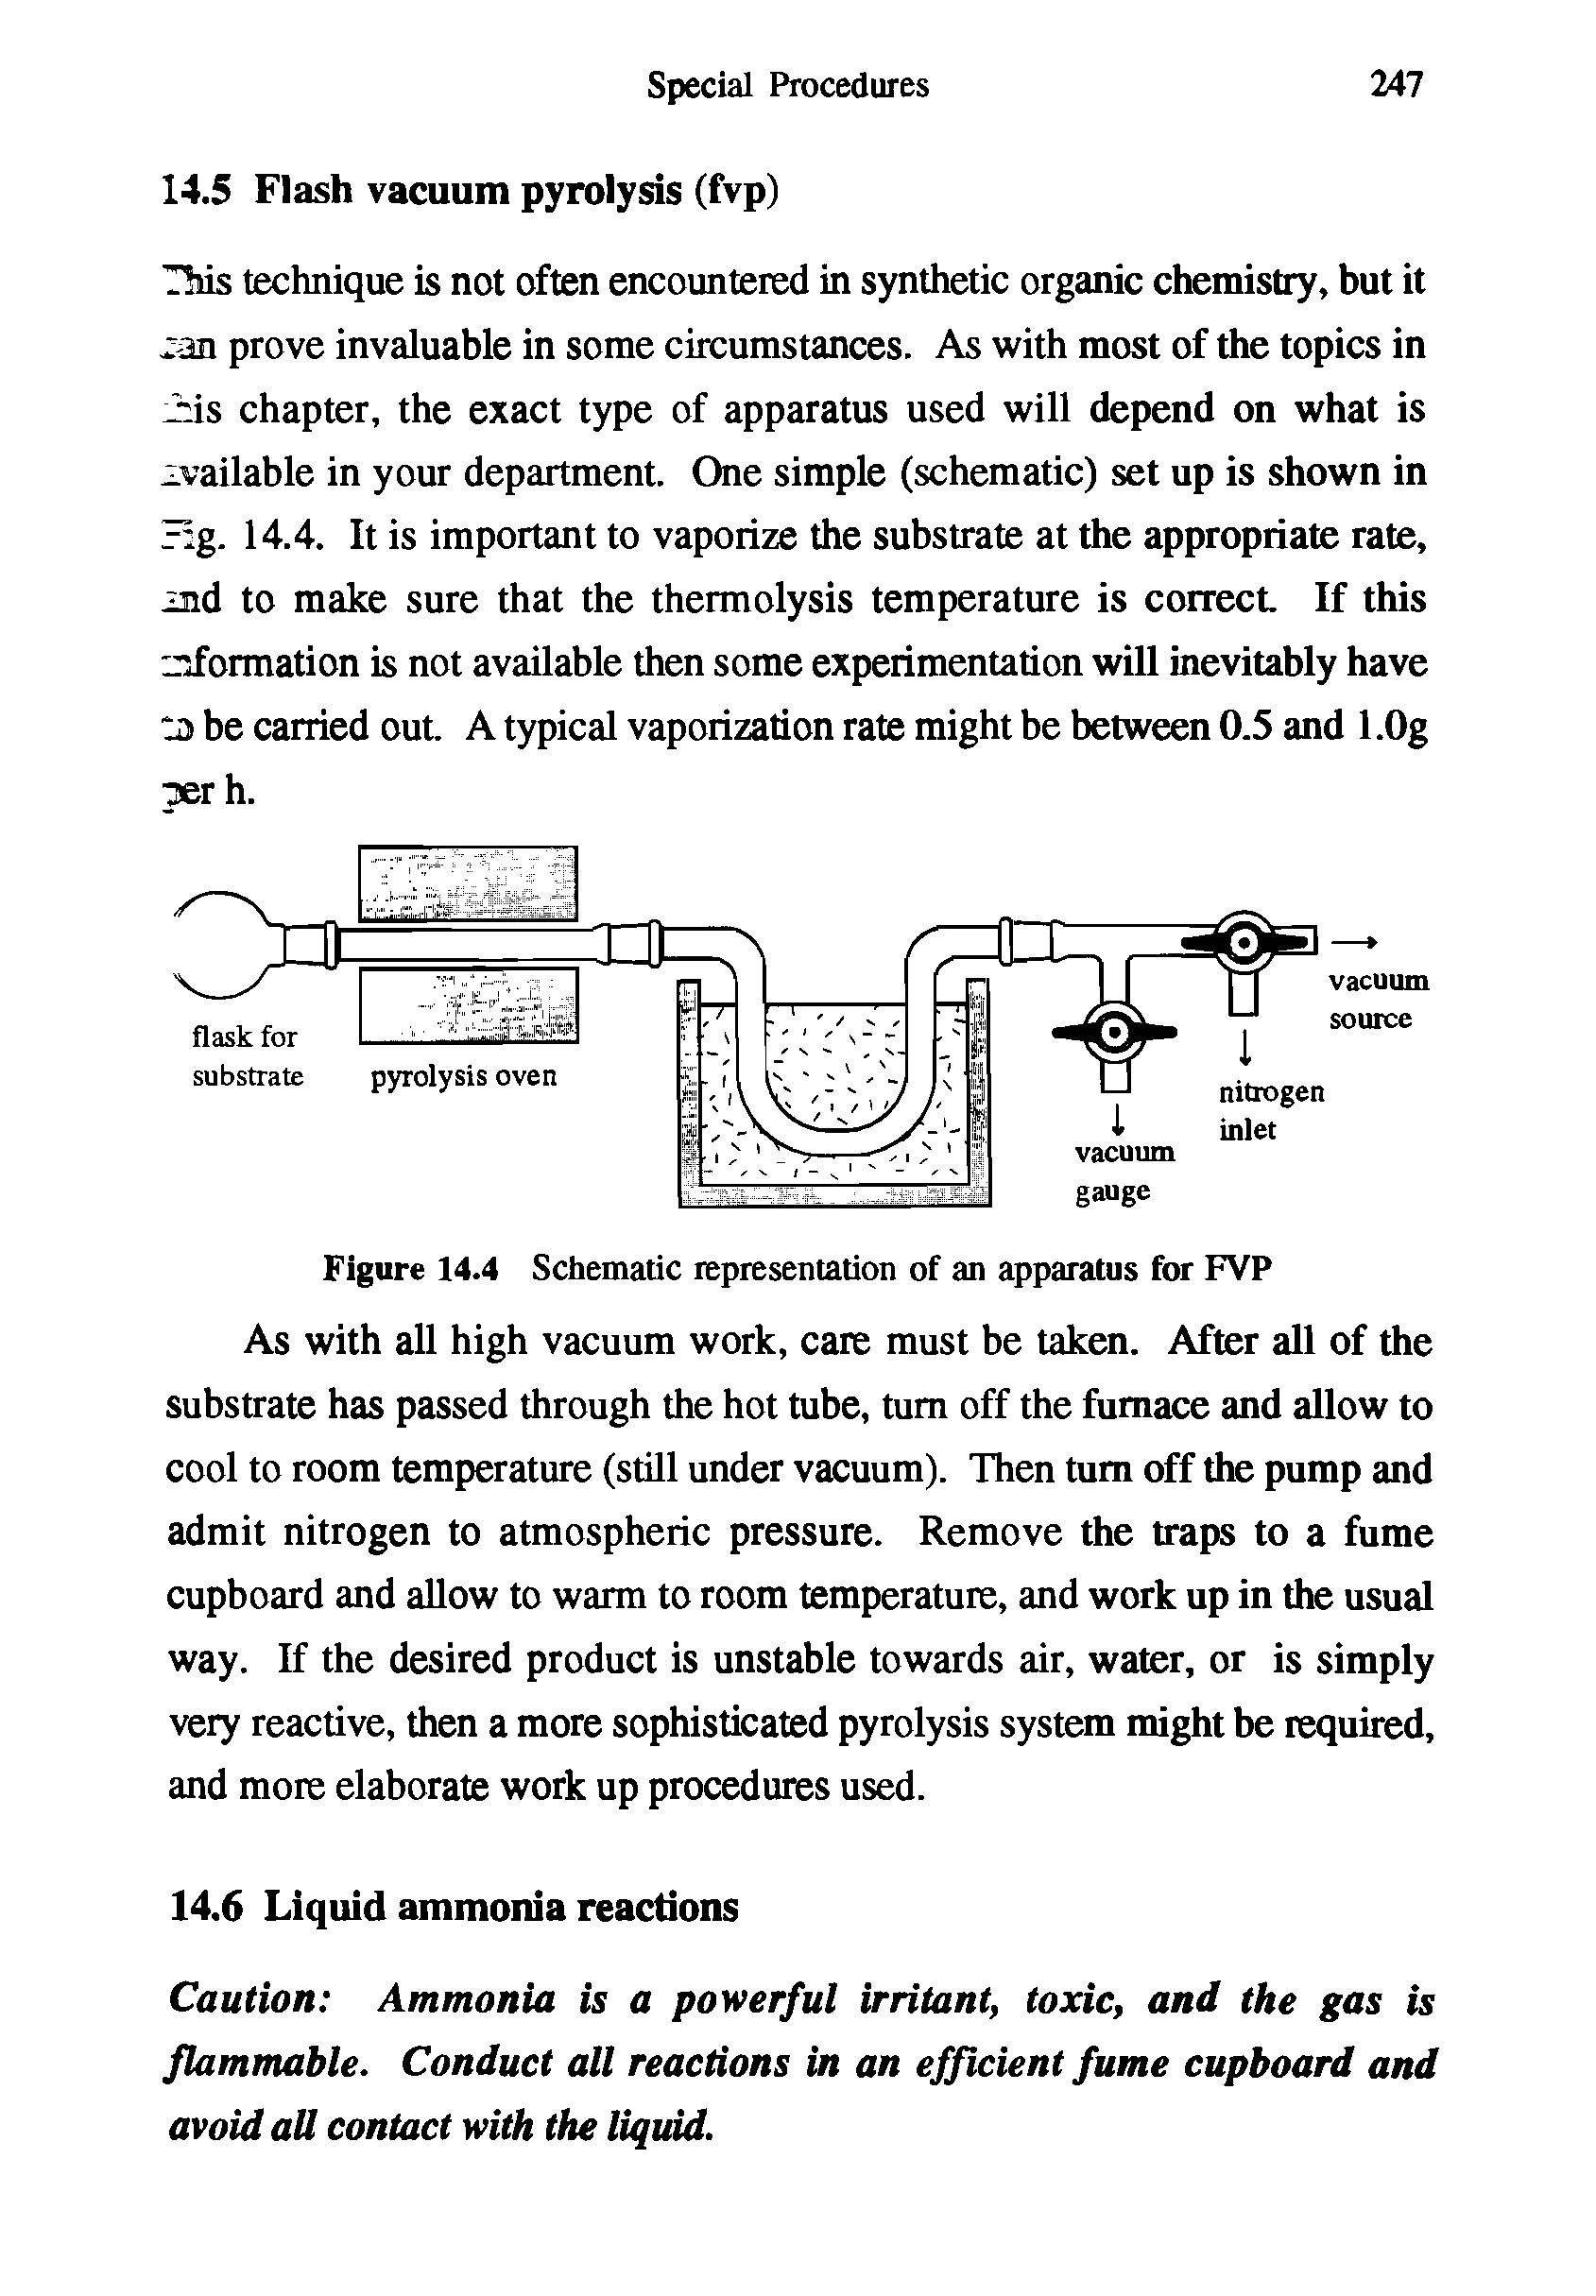 Figure 14.4 Schematic representation of an apparatus for FVP As with all high vacuum work, care must be taken. After all of the substrate has passed through the hot tube, turn off the furnace and allow to cool to room temperature (still under vacuum). Then turn off the pump and admit nitrogen to atmospheric pressure. Remove the traps to a fume cupboard and allow to warm to room temperature, and work up in the usual way. If the desired product is unstable towards air, water, or is simply very reactive, then a more sophisticated pyrolysis system might be required, and more elaborate work up procedures used.